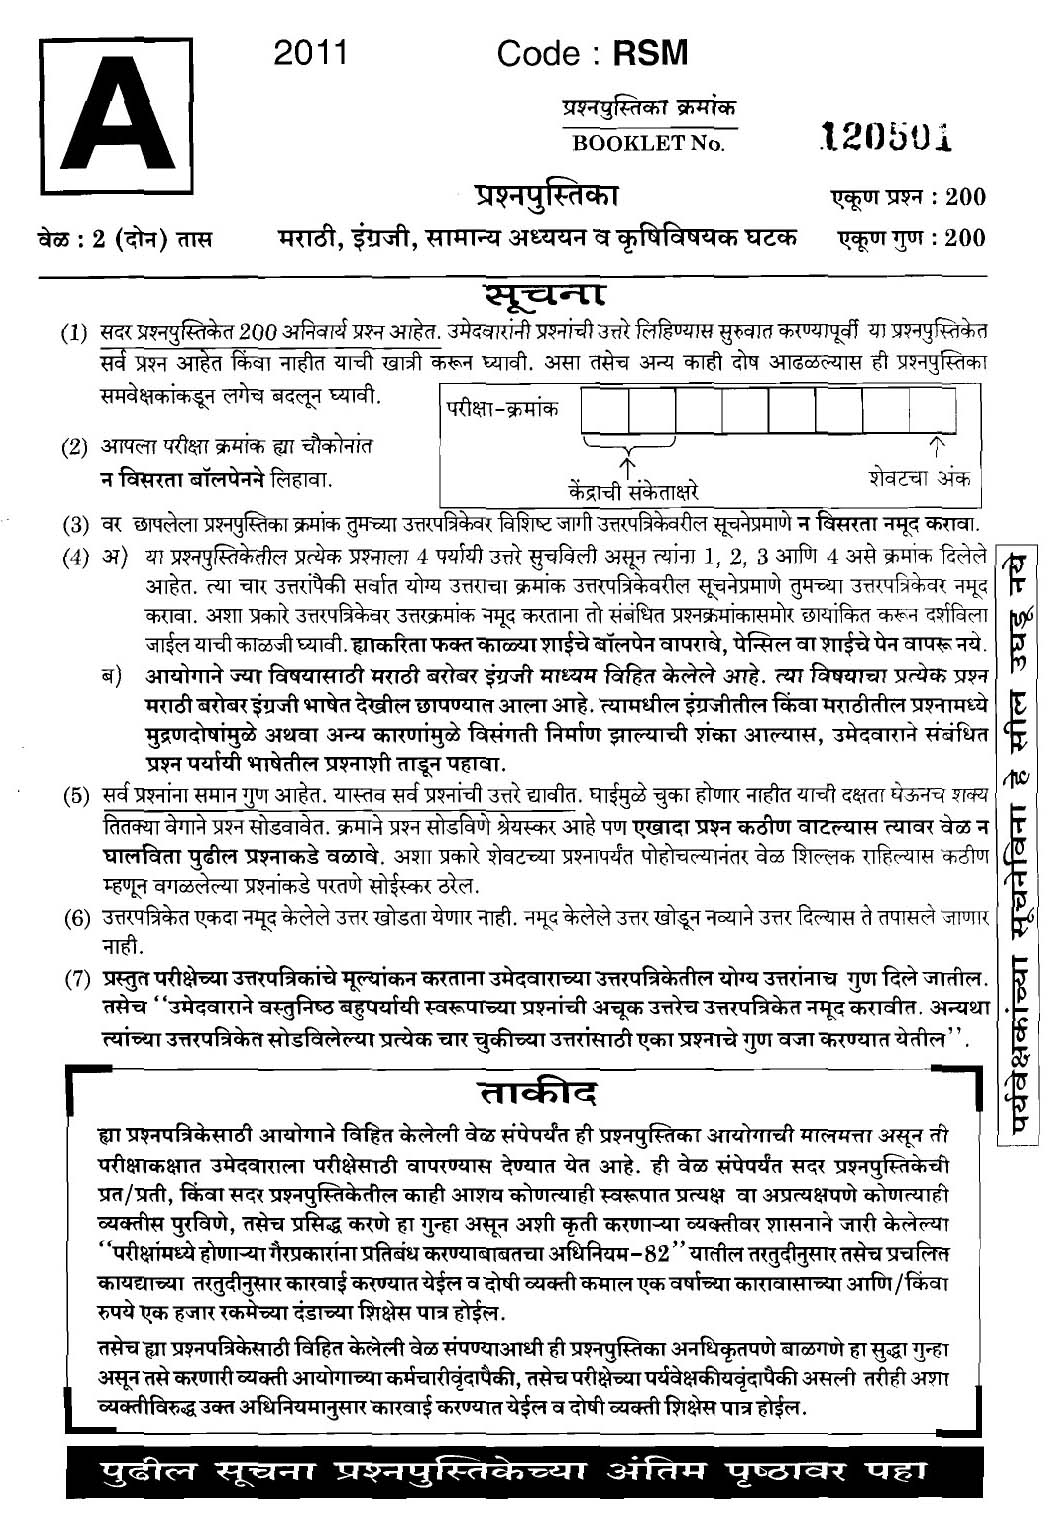 MPSC Agricultural Services Preliminary Exam 2011 Question Paper 1